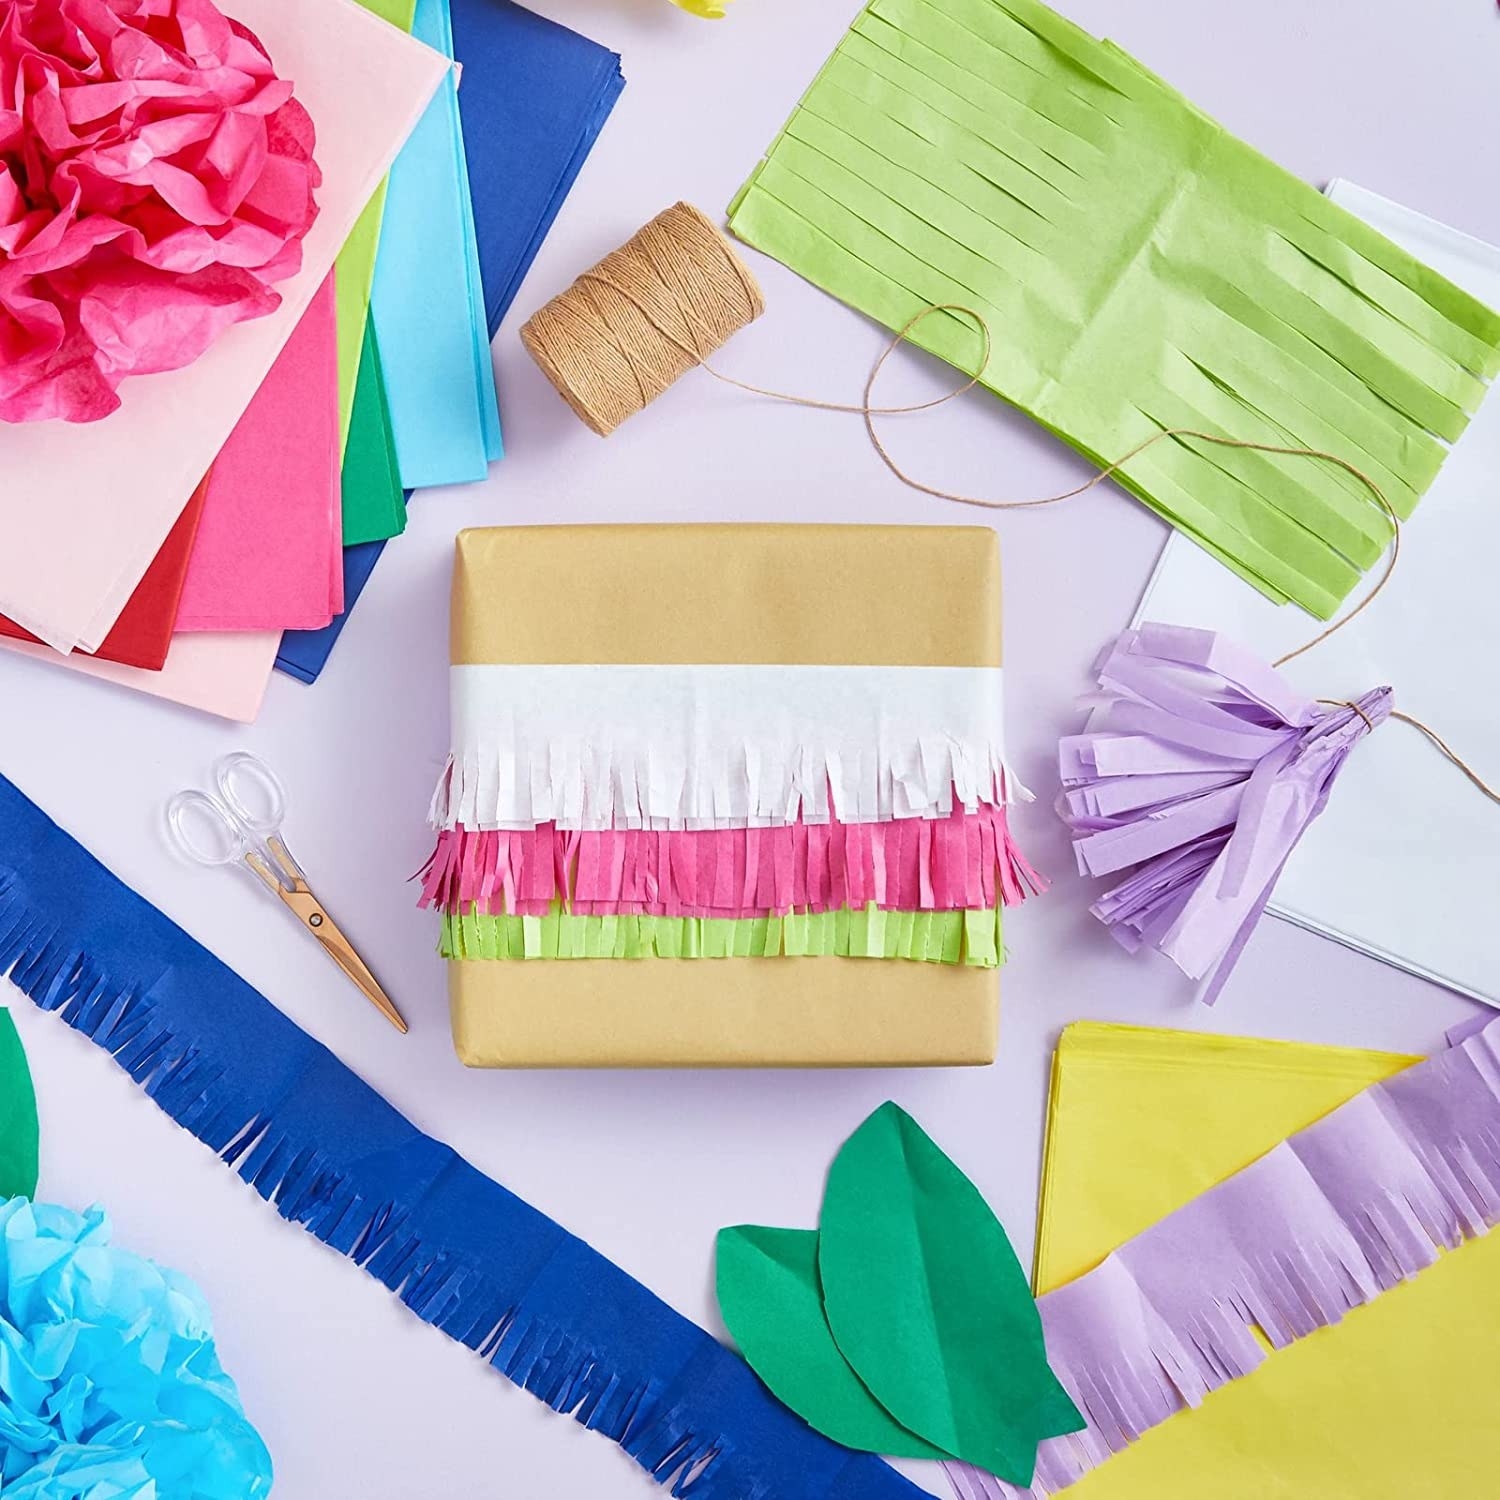 The multicolored tissue paper being used to decorate a box